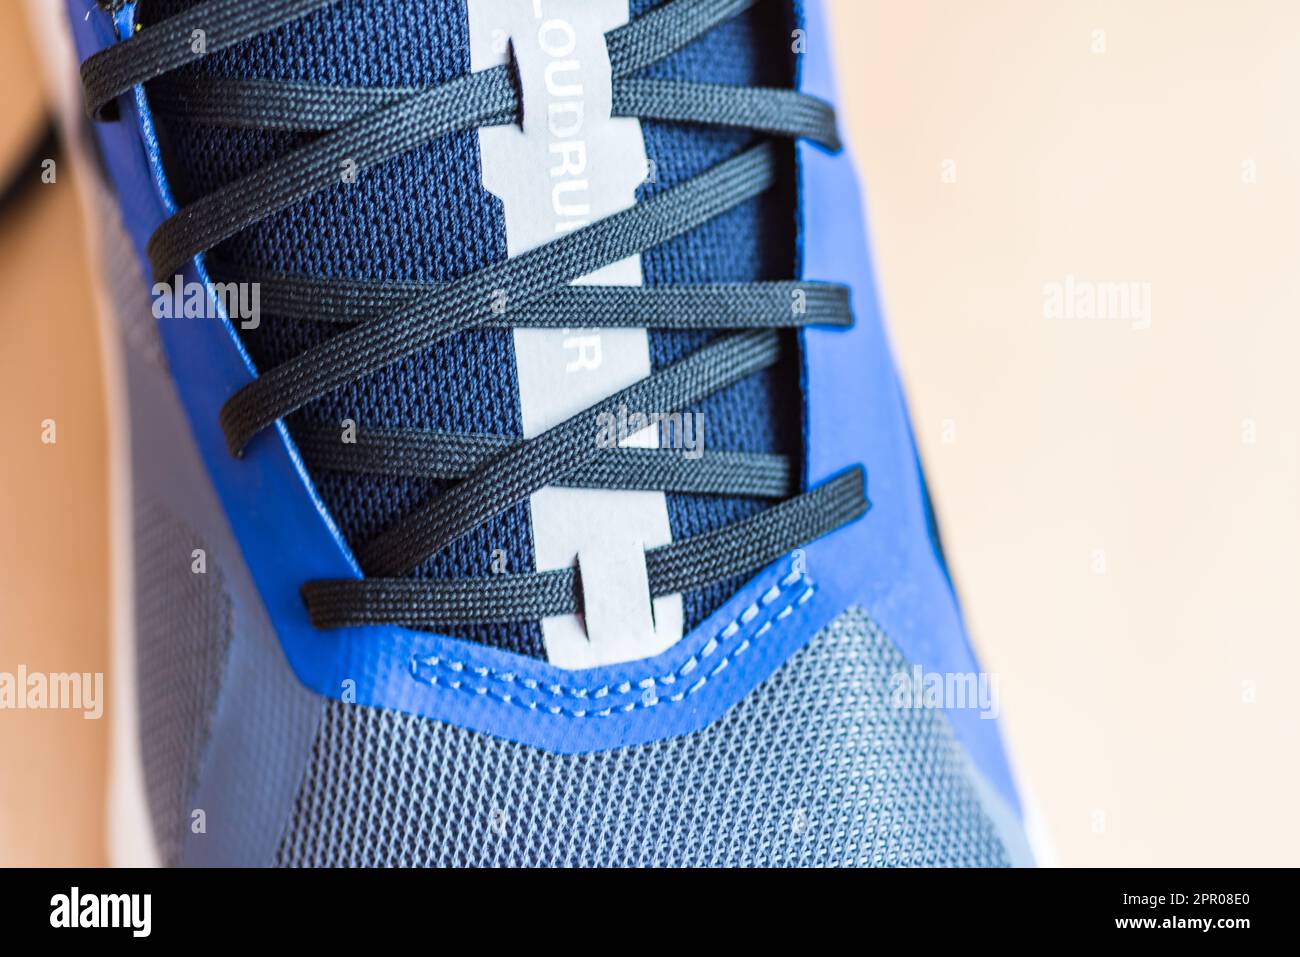 Details of Shoe showing blue laces on a running shoe Stock Photo